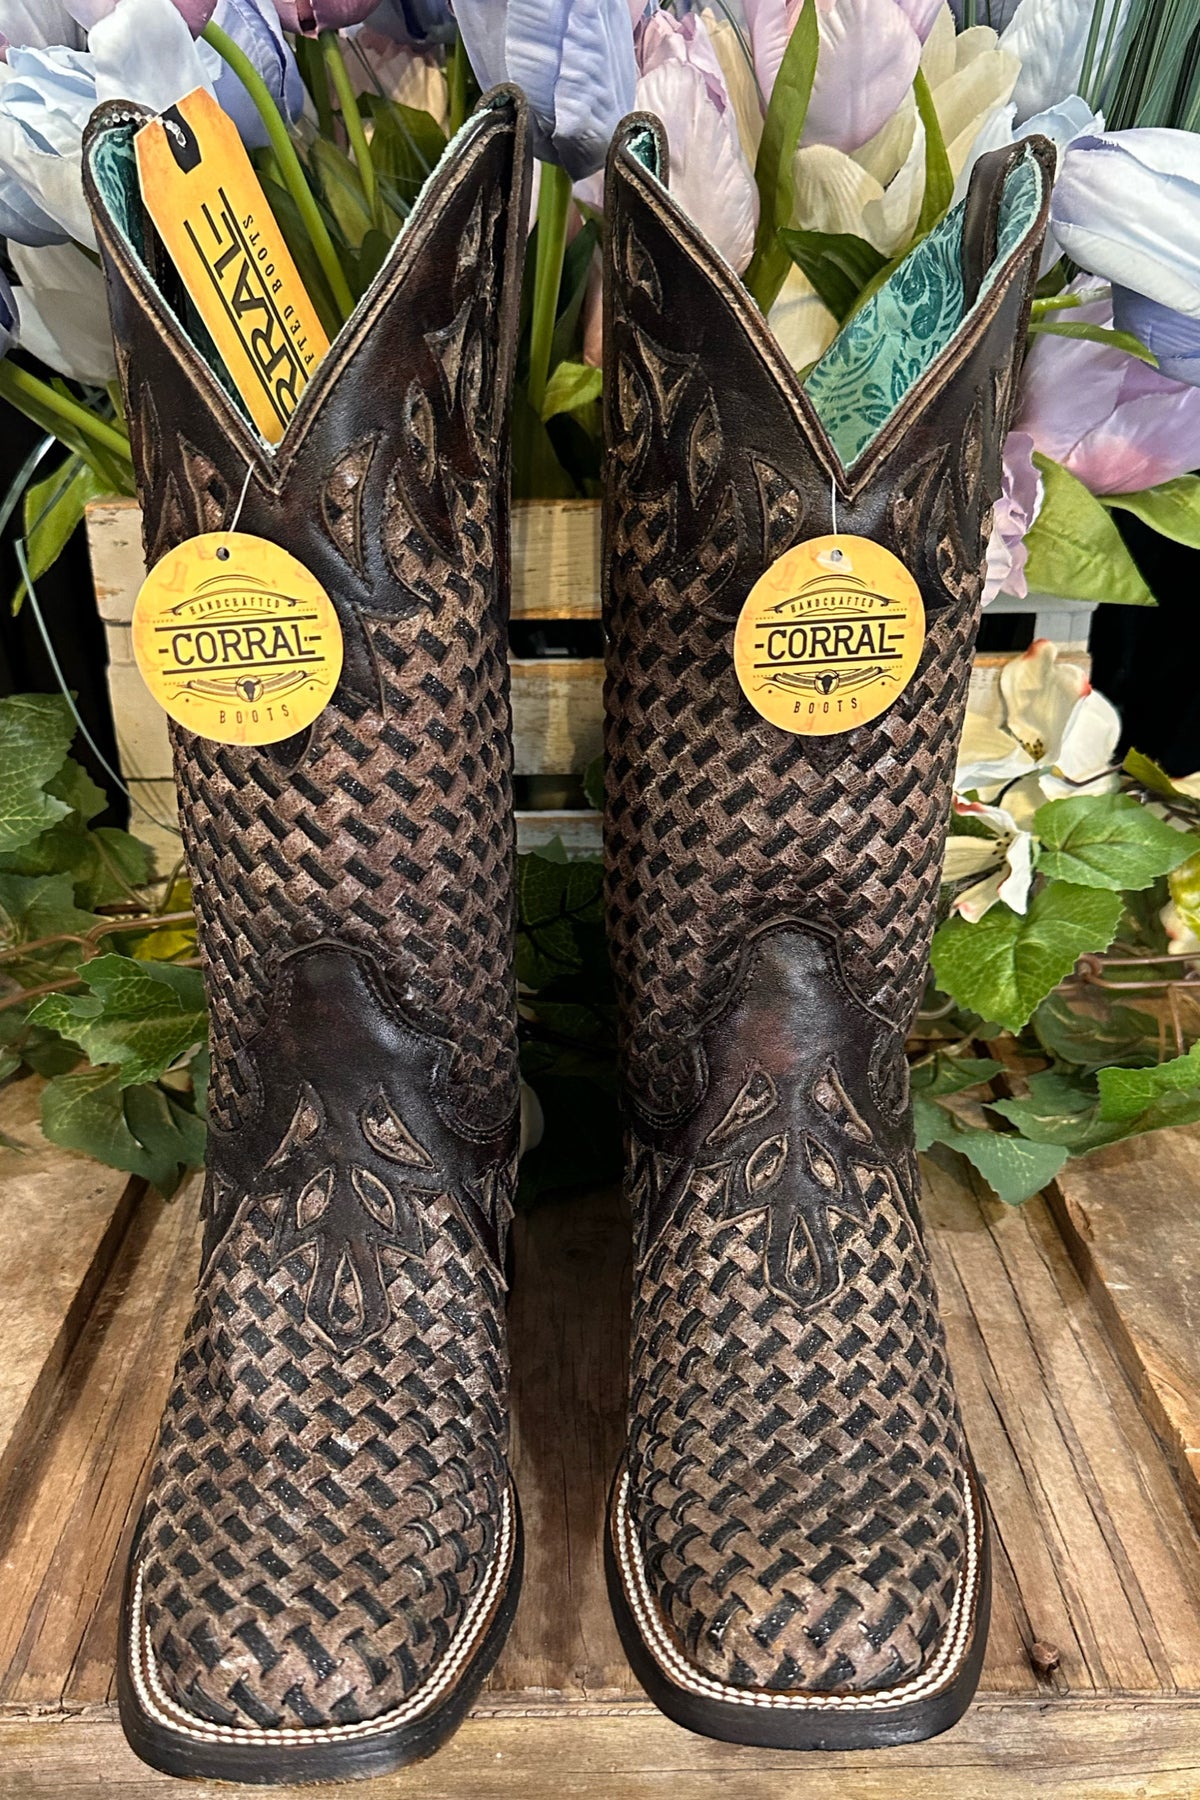 Chocolate Glitter Woven & Overlay Square Toe Boot by Corral Boots-Boot-Corral Boots-Gallop 'n Glitz- Women's Western Wear Boutique, Located in Grants Pass, Oregon